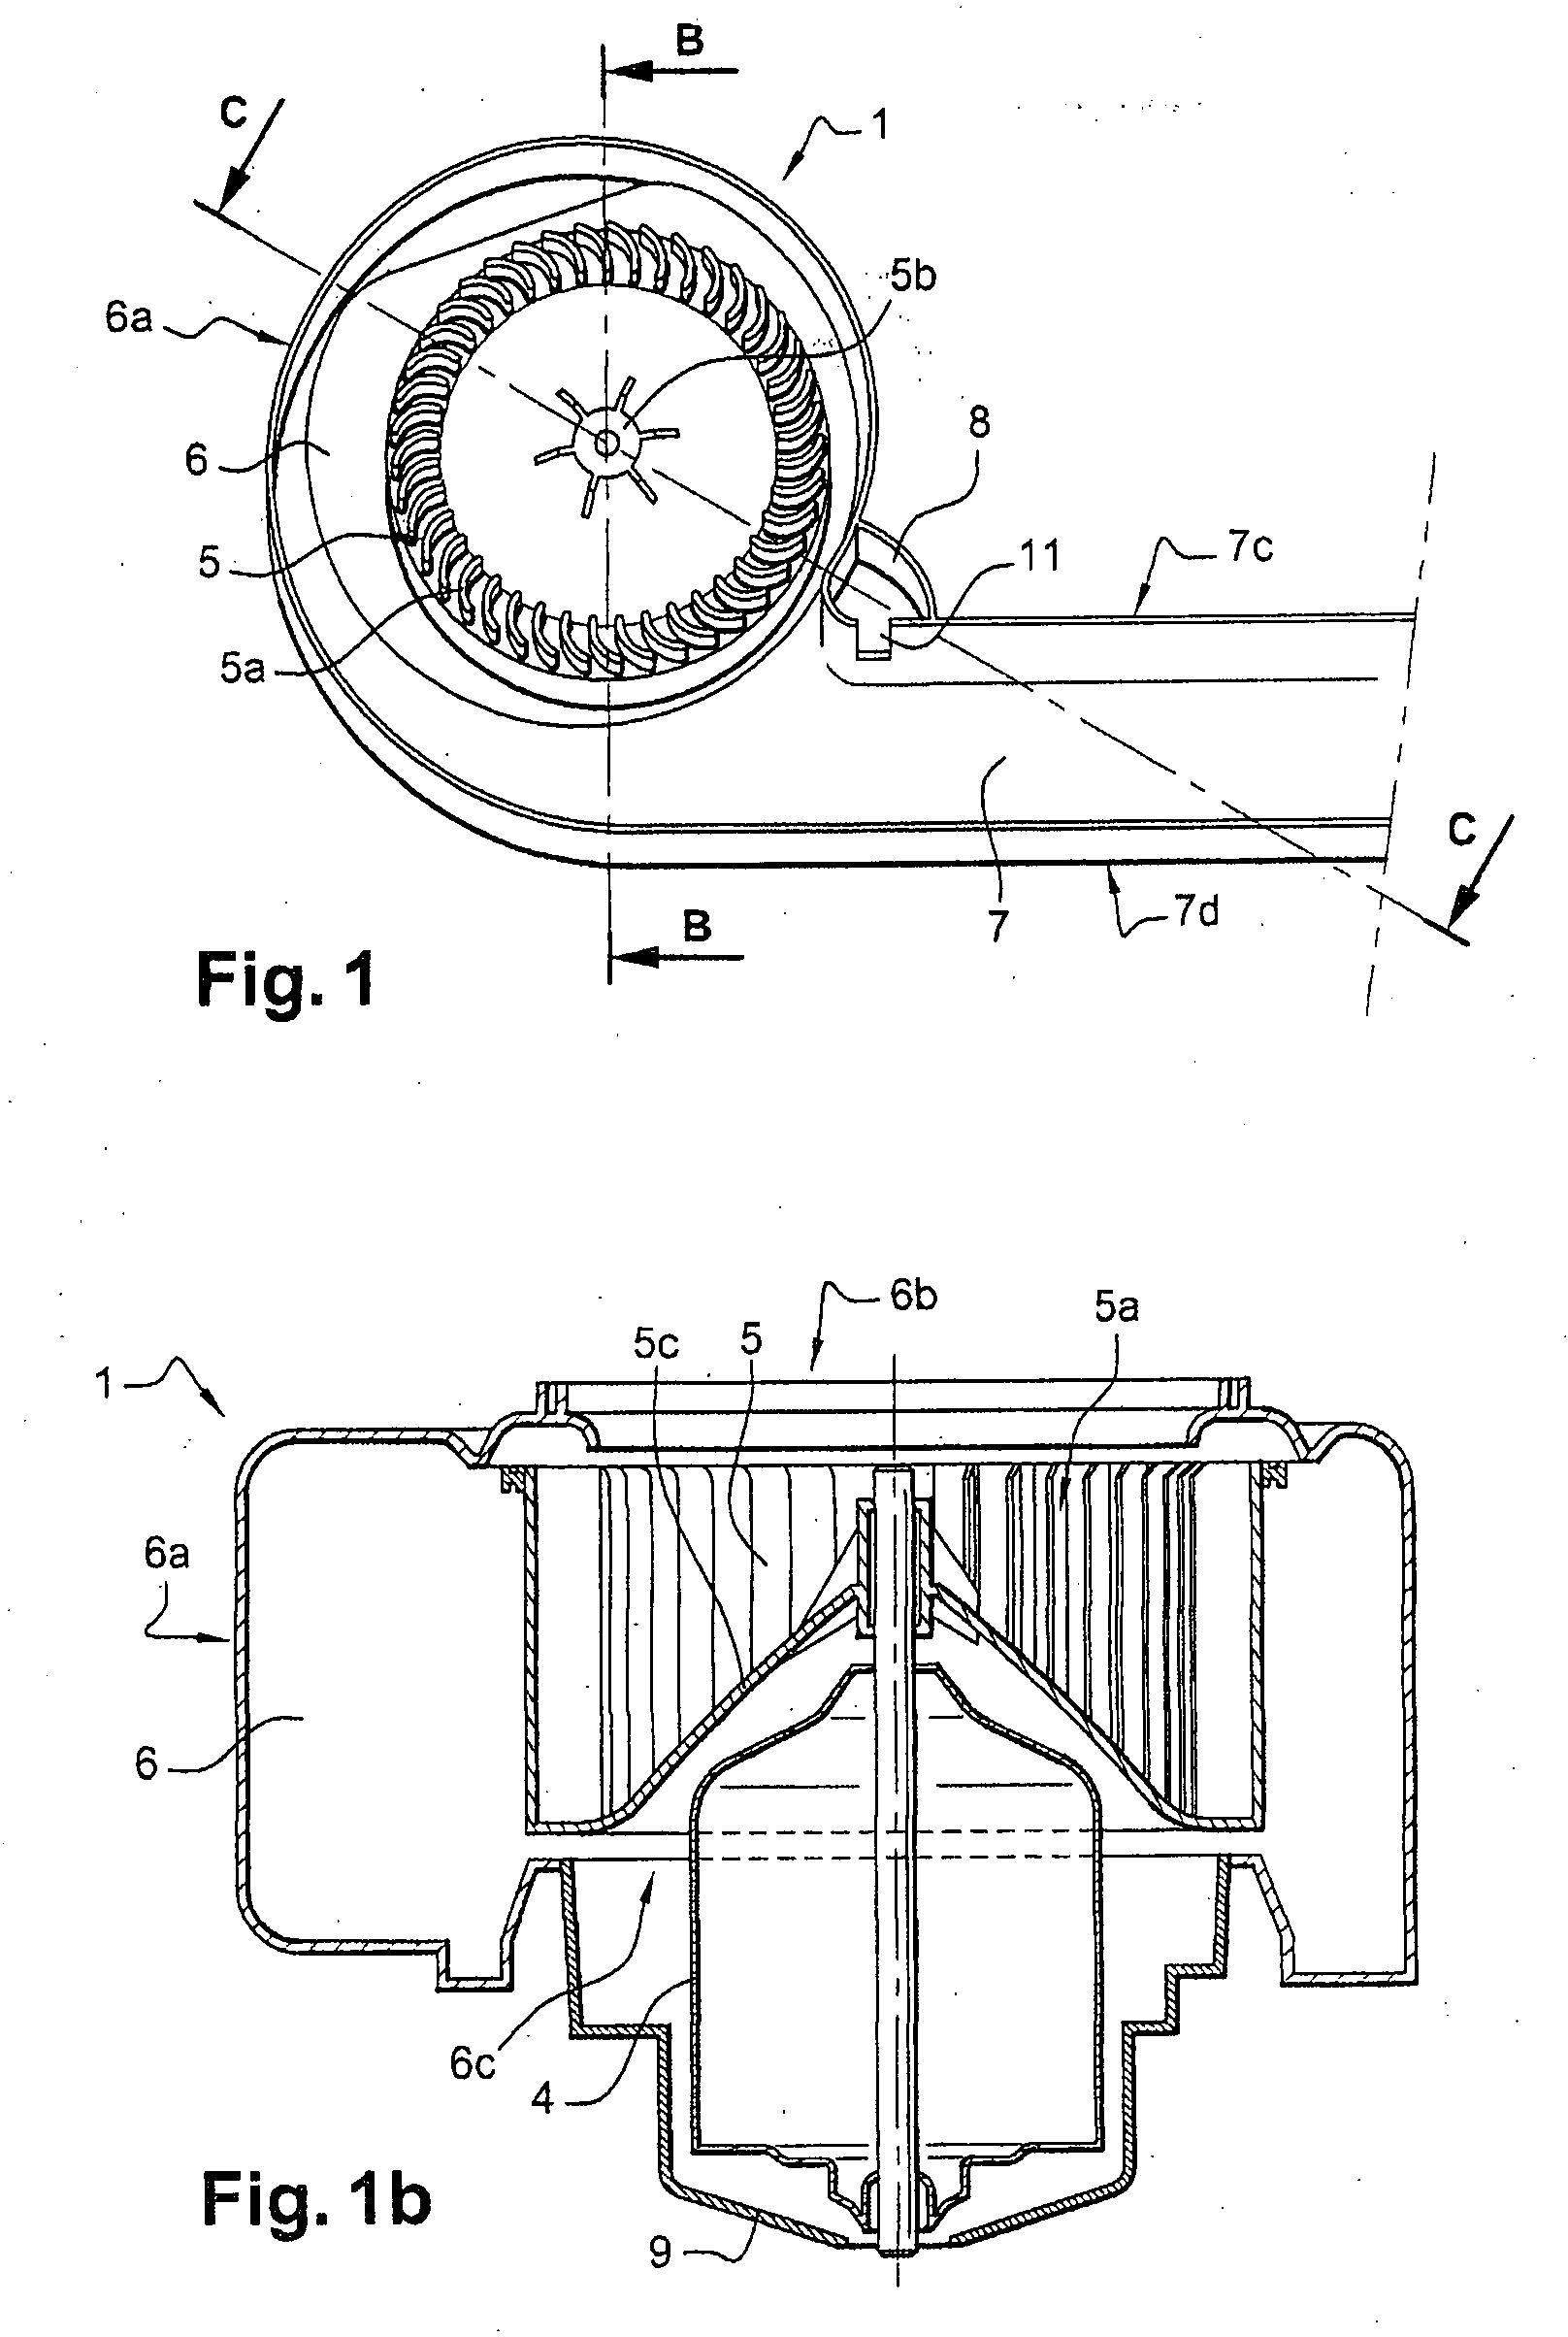 Cooling channel for a fan motor for a ventilation, heating, and/or air conditioning system